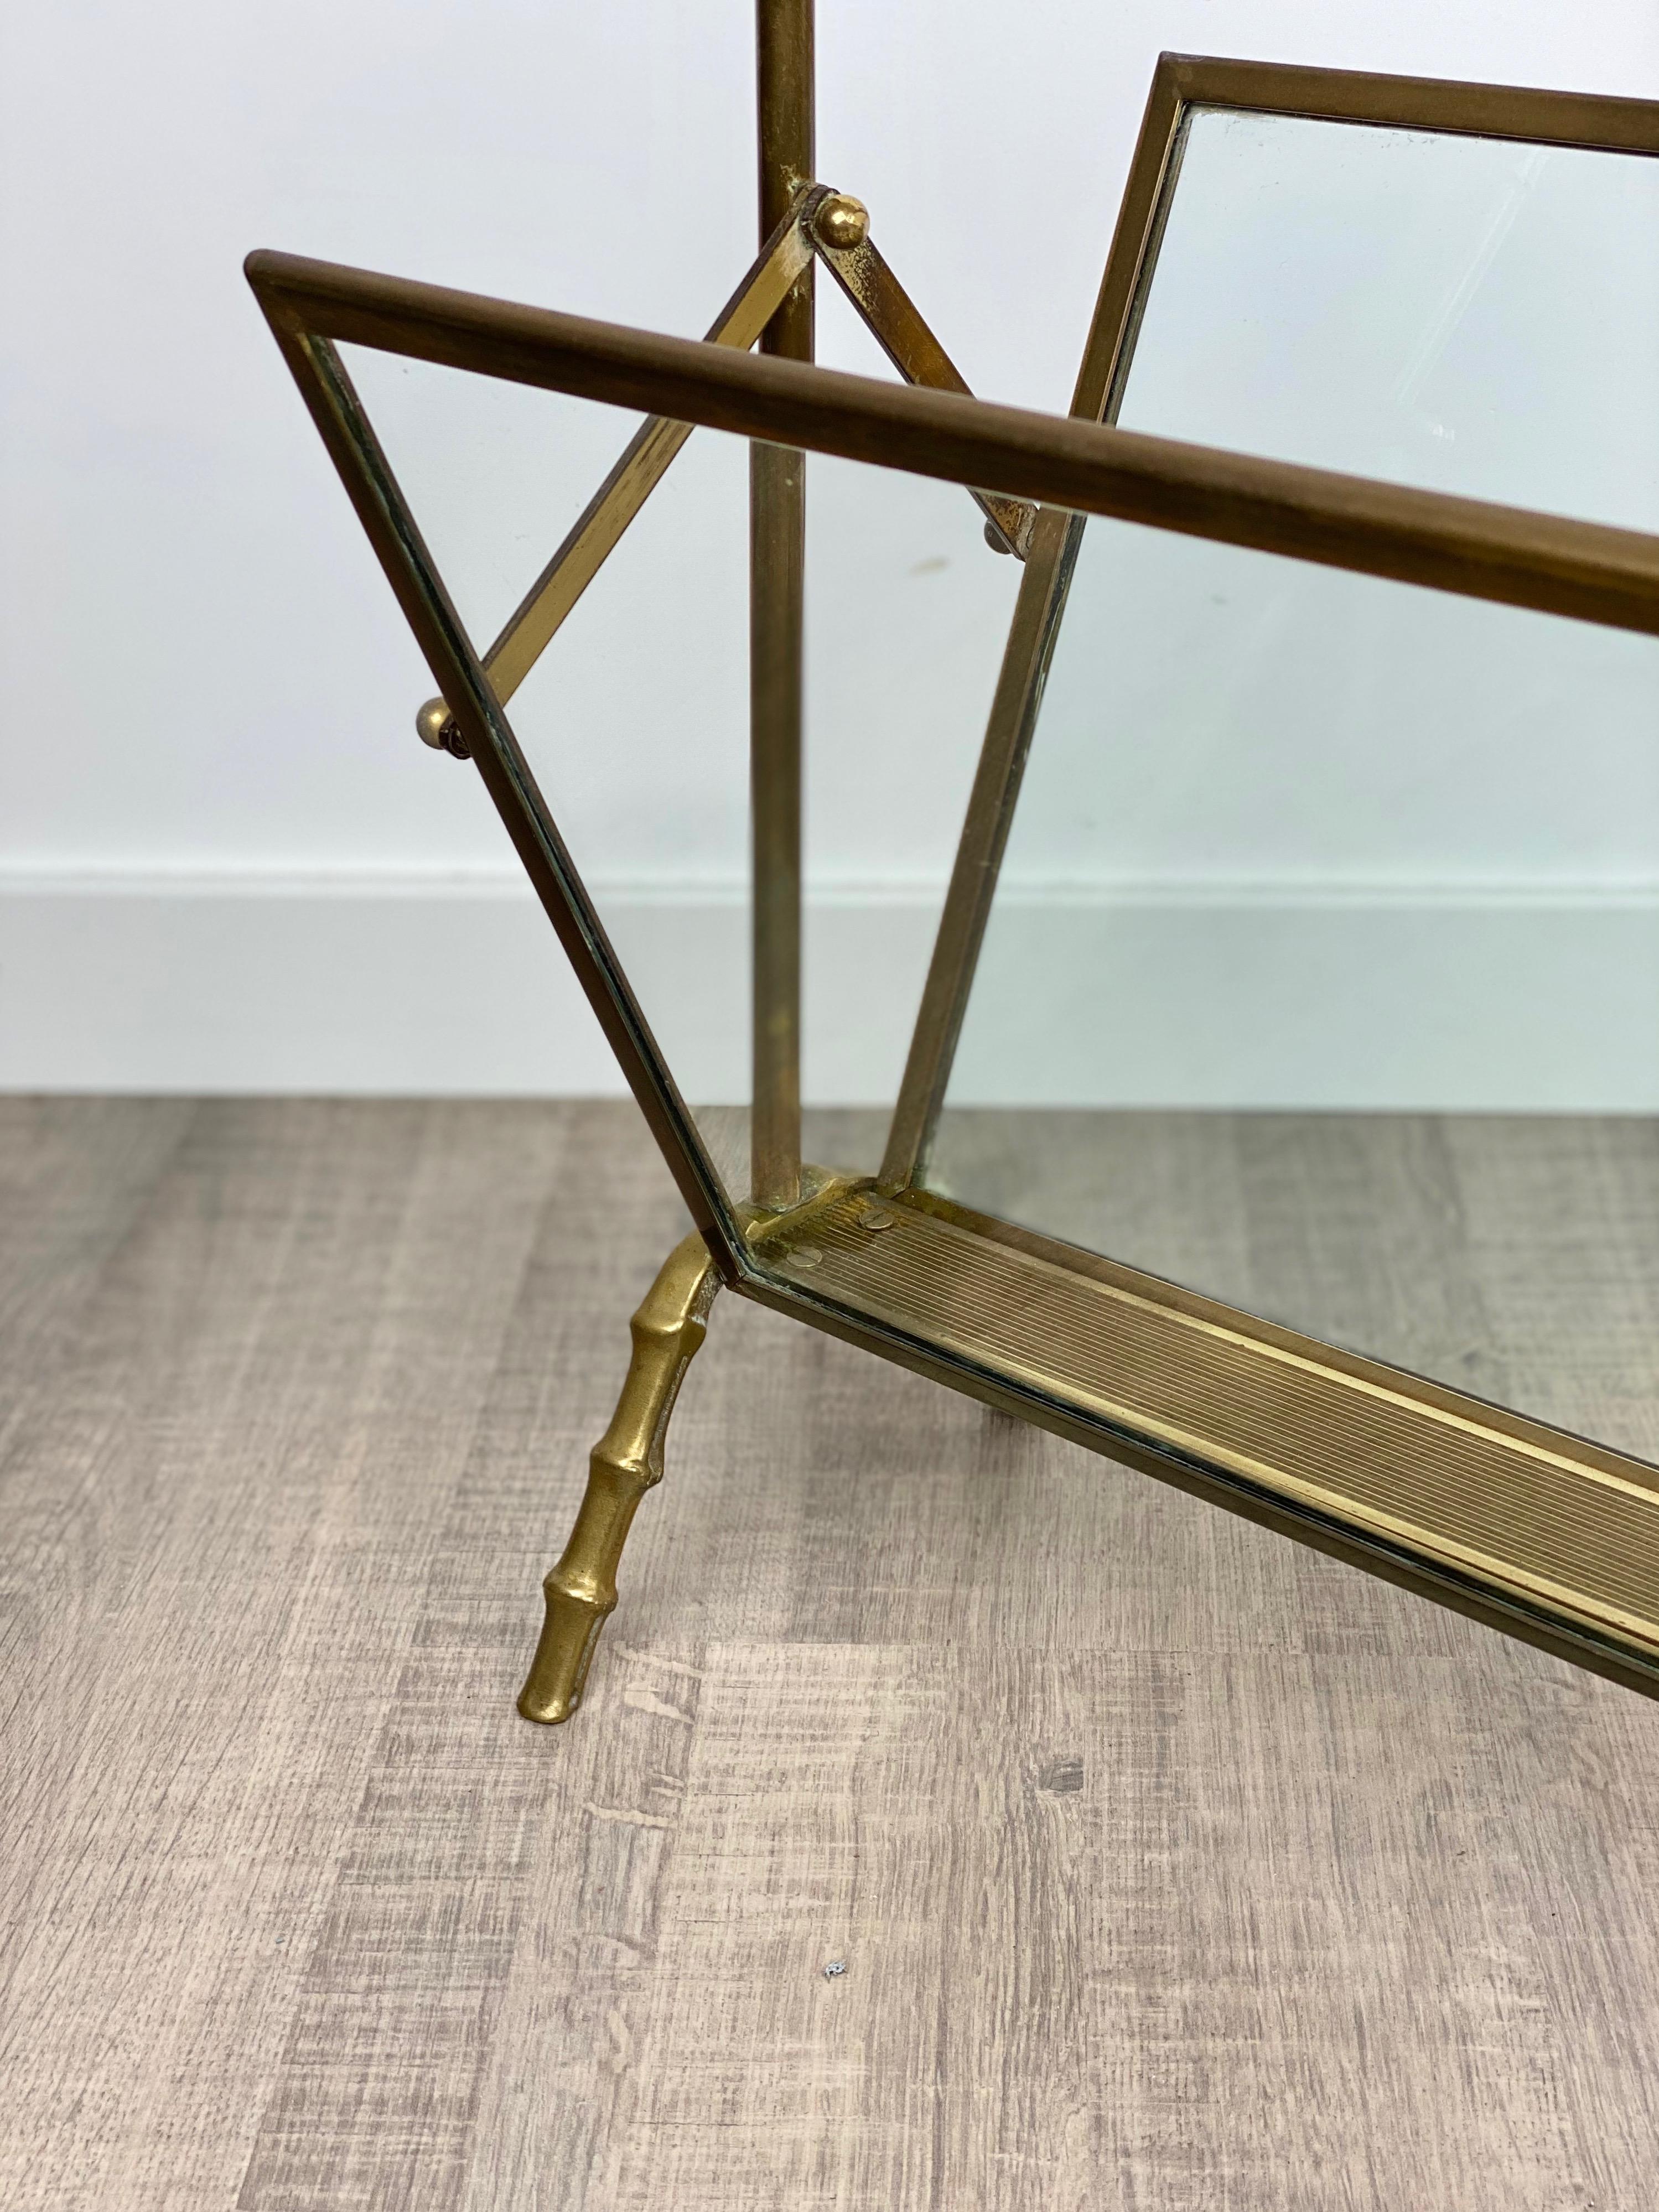 Maison Baguès Magazine Rack Stand Faux Bamboo Brass Glass, France, 1950s For Sale 2